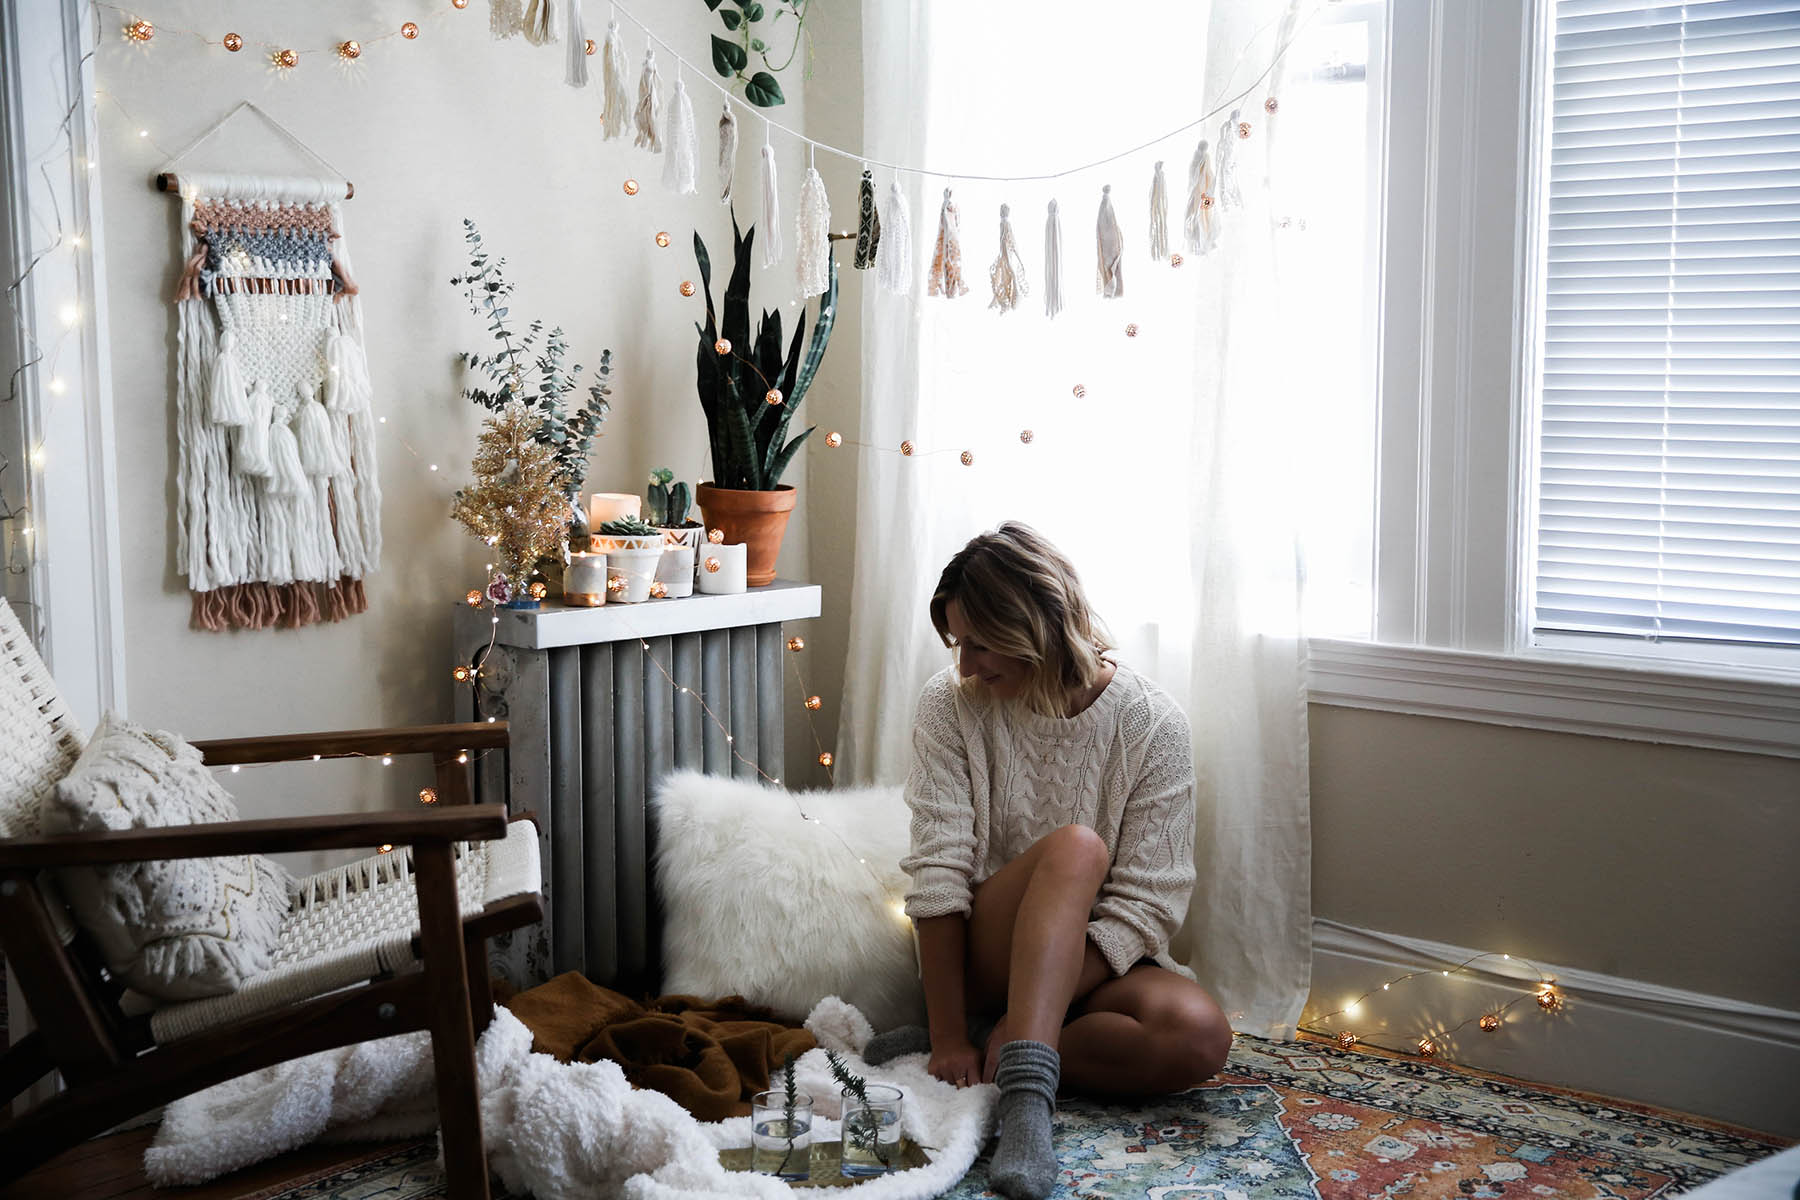 cozy bohemian holiday decorations with Urban Outfitters home